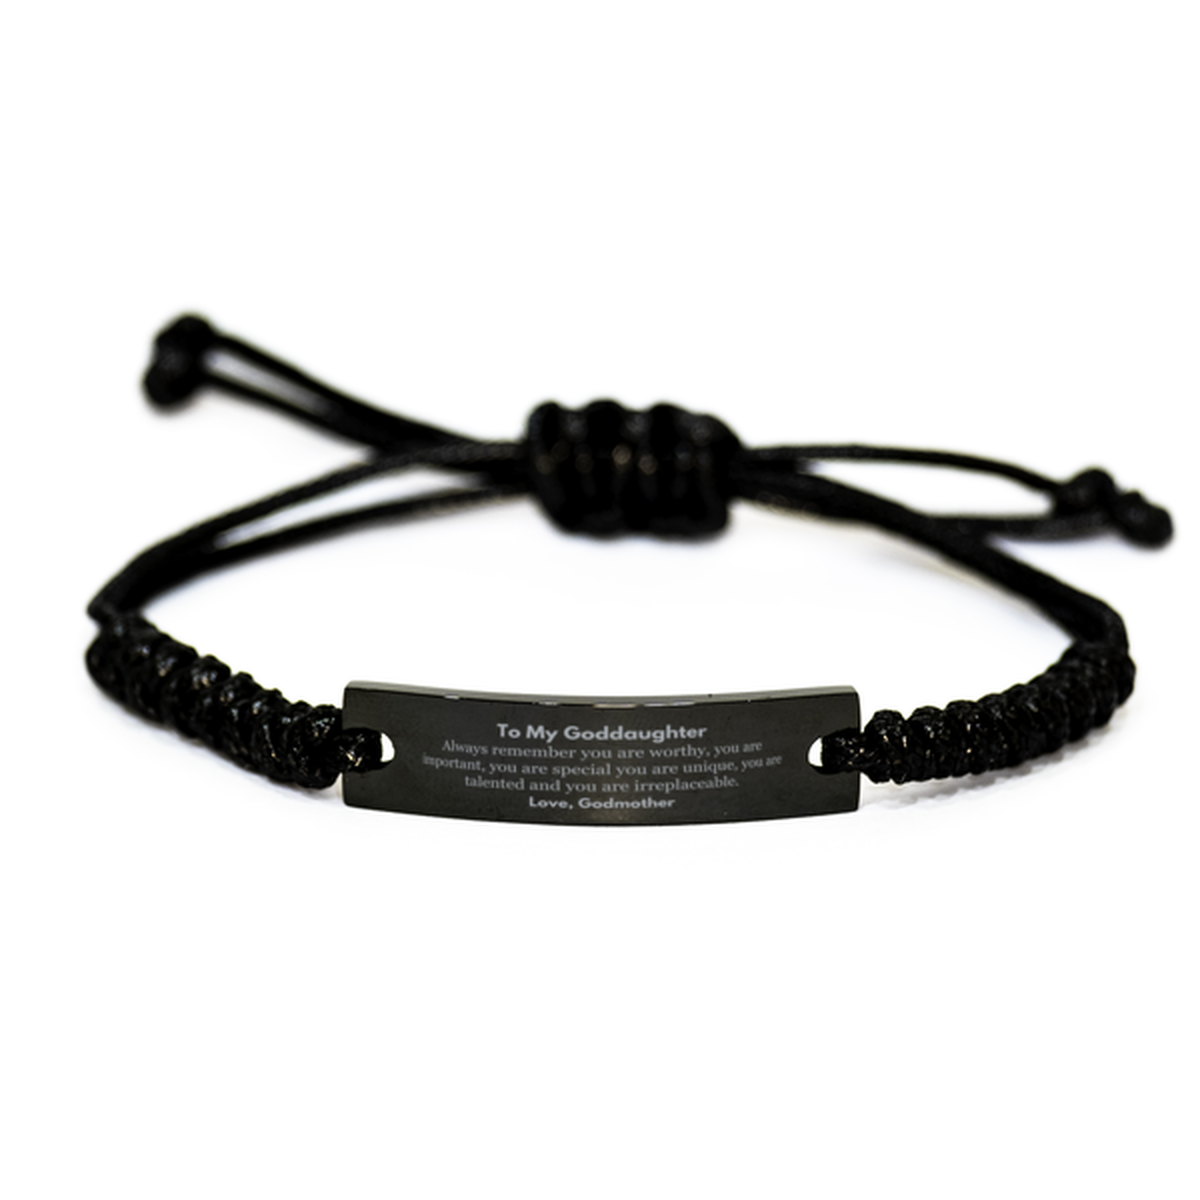 Goddaughter Birthday Gifts from Godmother, Inspirational Black Rope Bracelet for Goddaughter Christmas Graduation Gifts for Goddaughter Always remember you are worthy, you are important. Love, Godmother